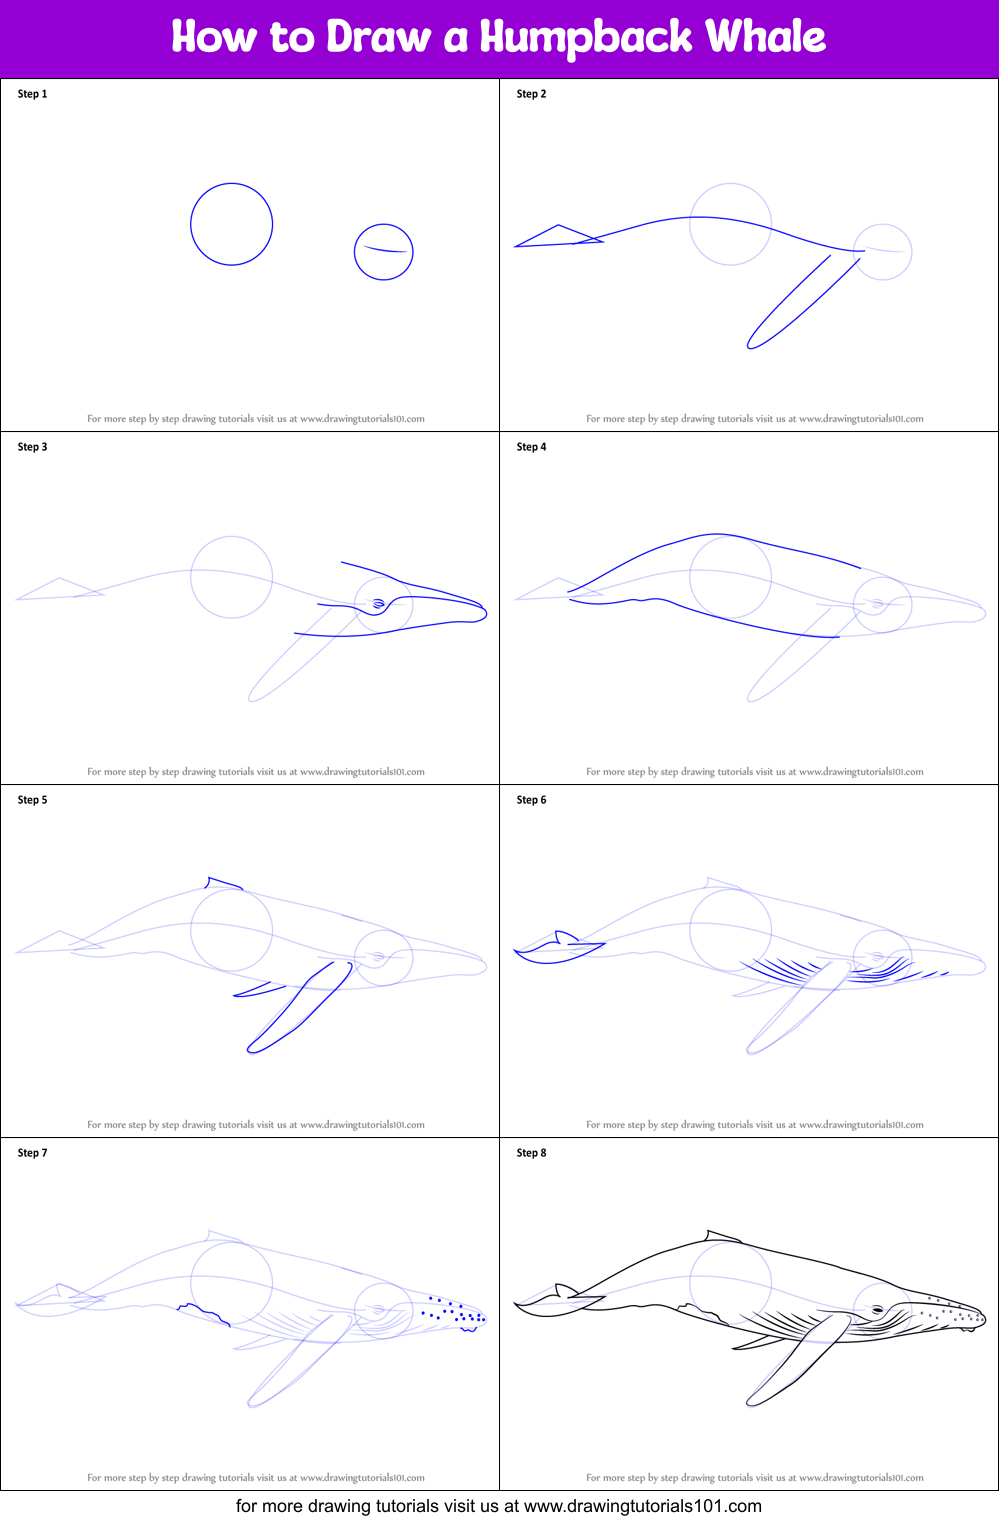 How to Draw a Humpback Whale step by step